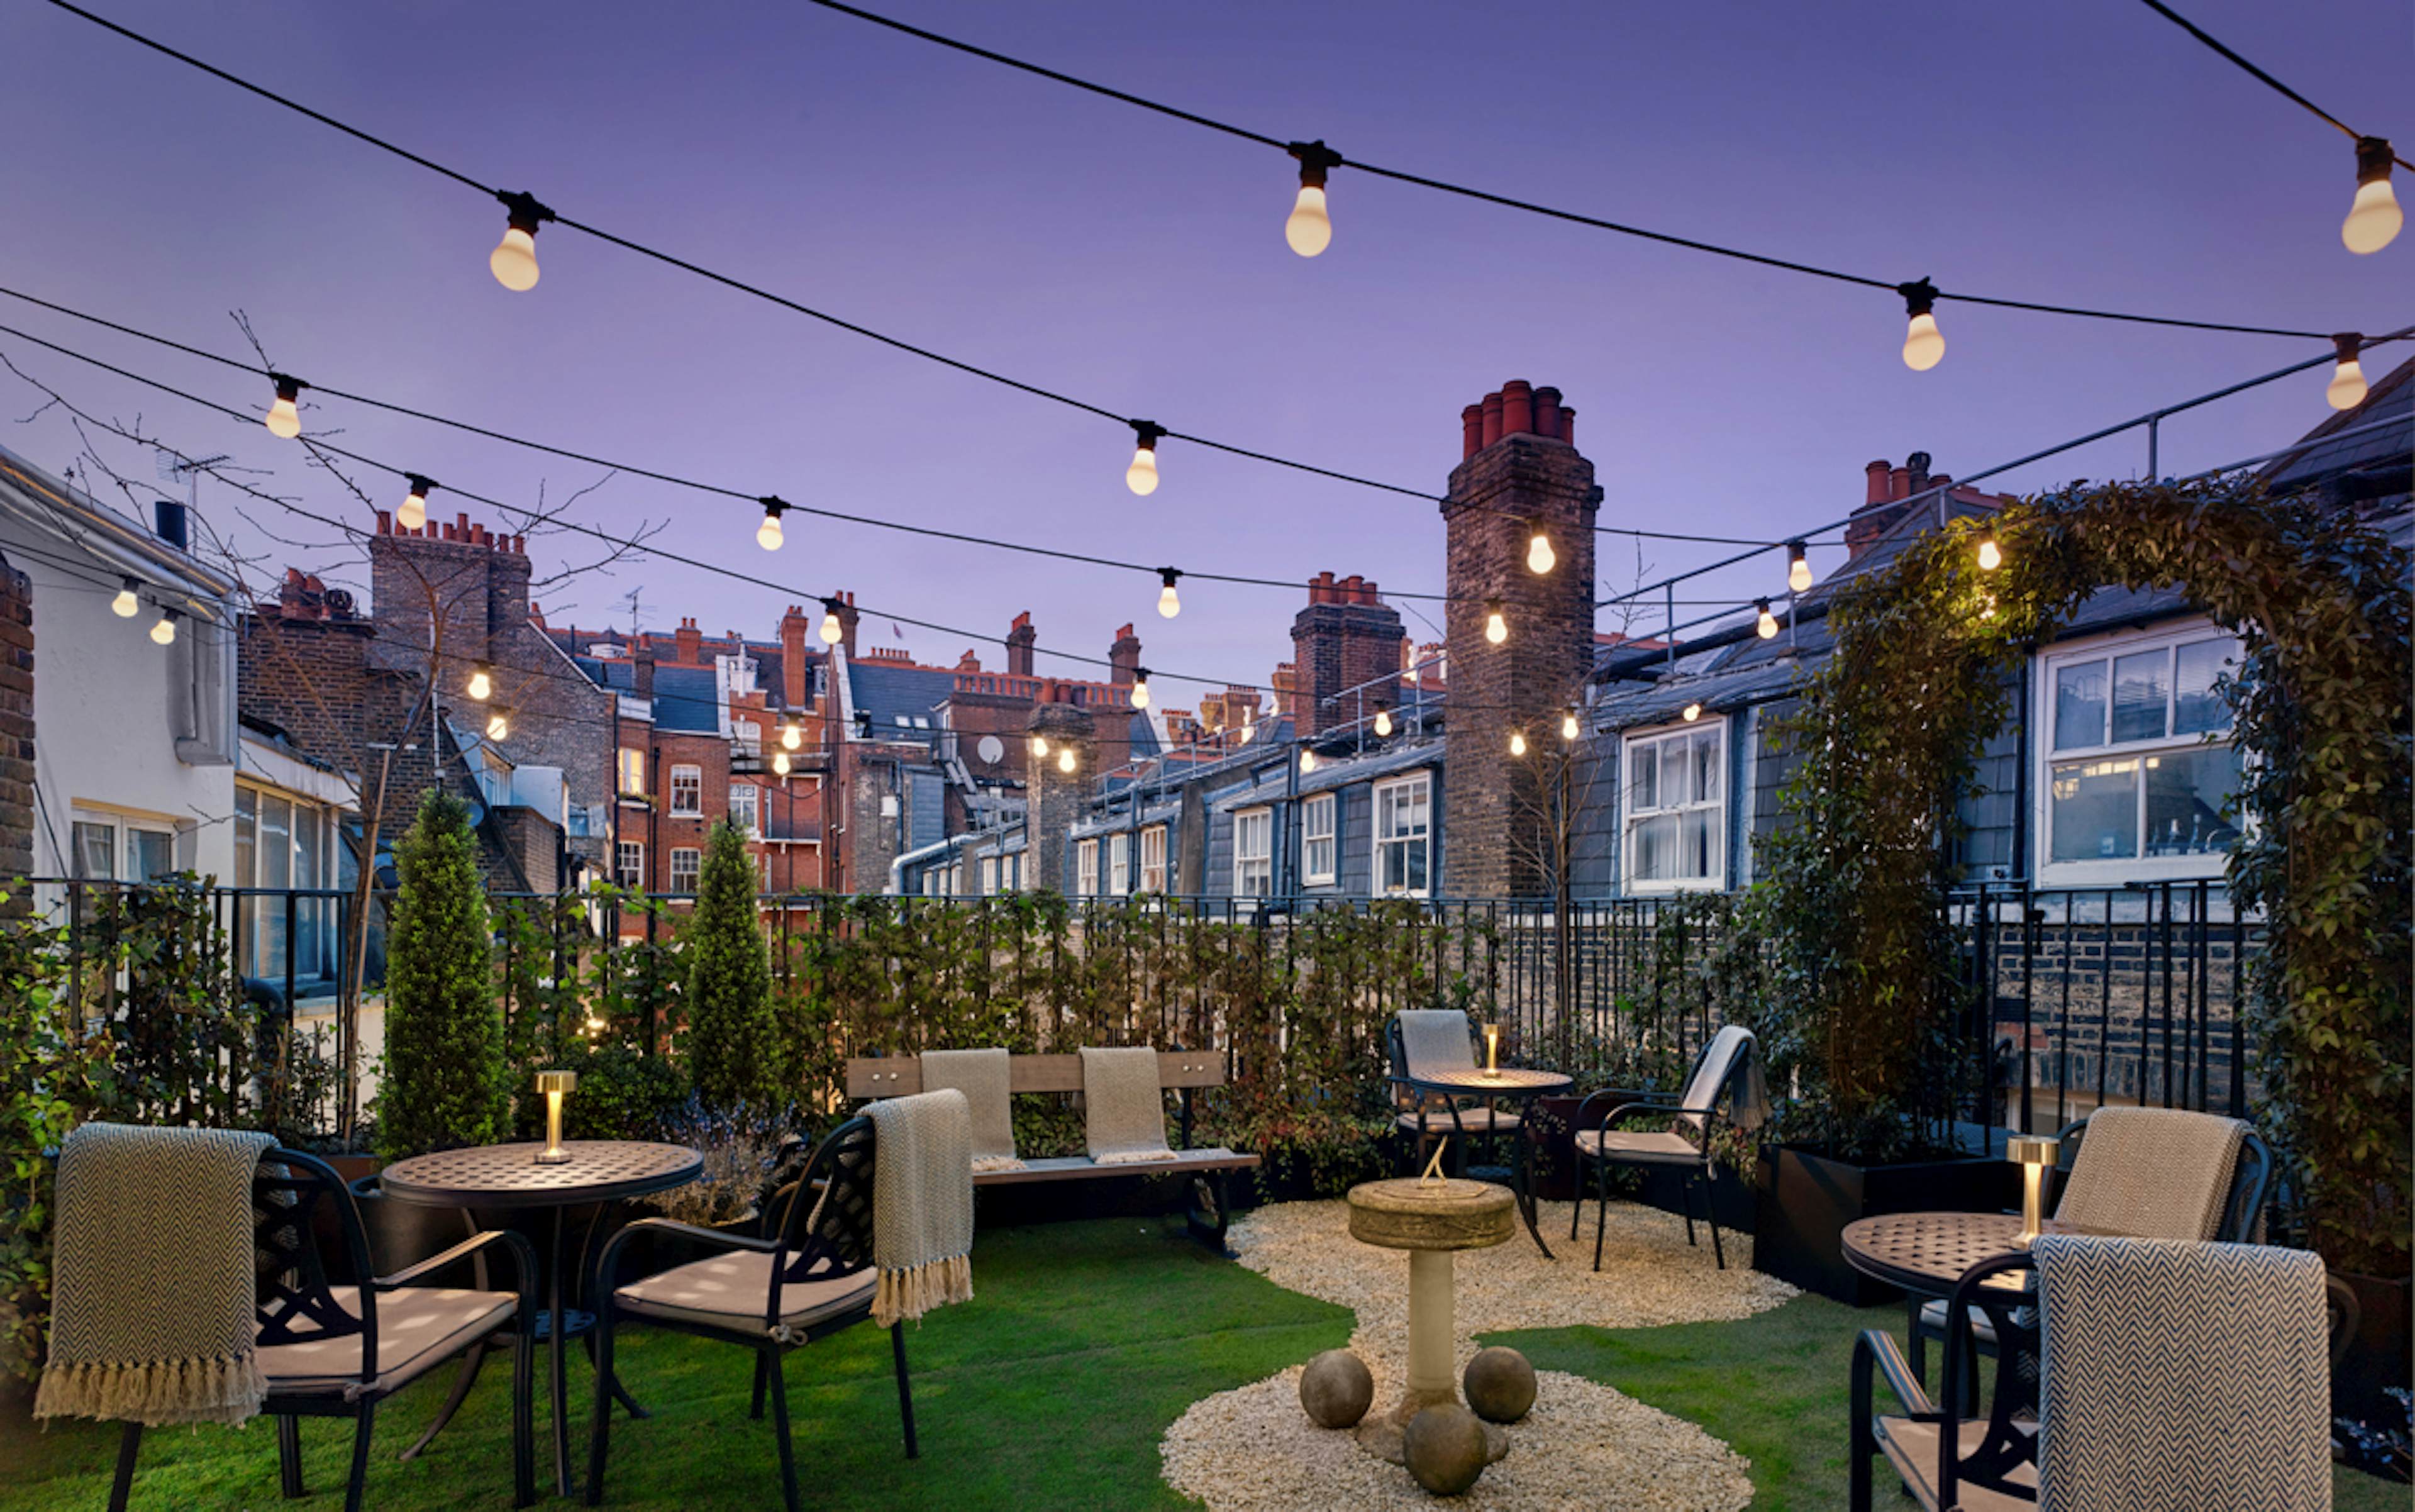 Holmes Hotel London - The Roof Terrace image 1